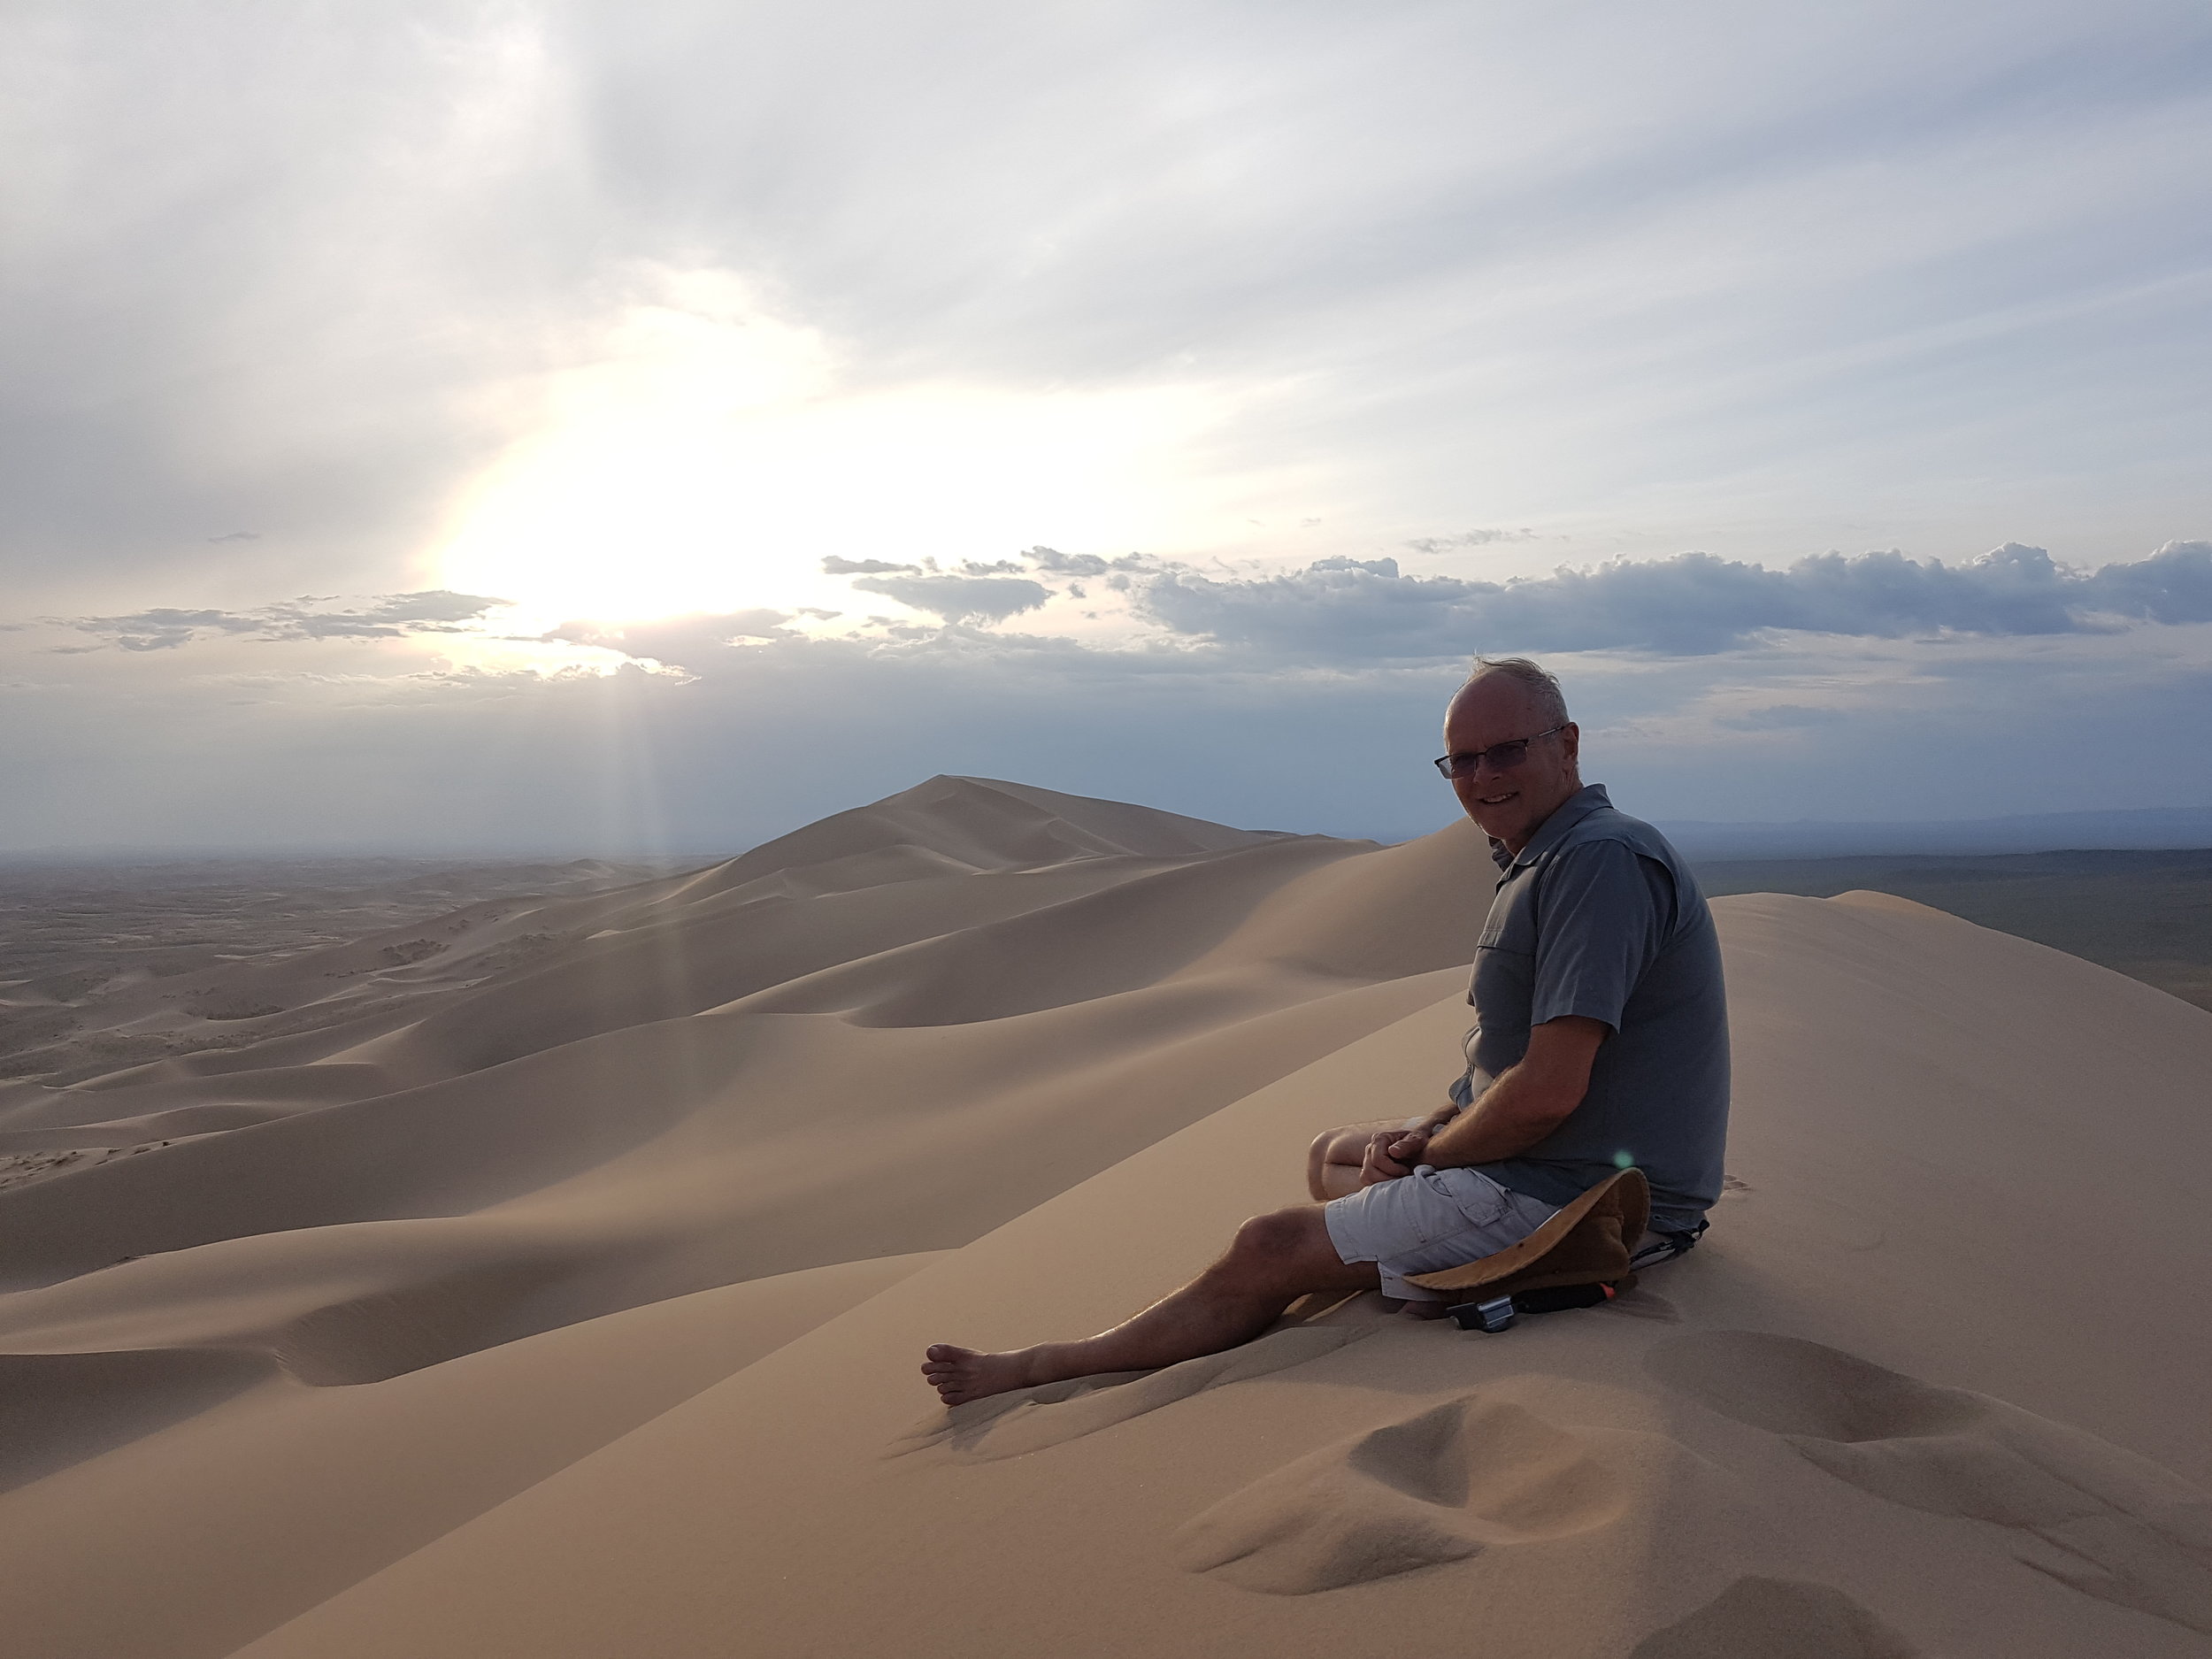 Enjoying the view on top of the 250 meter high dune